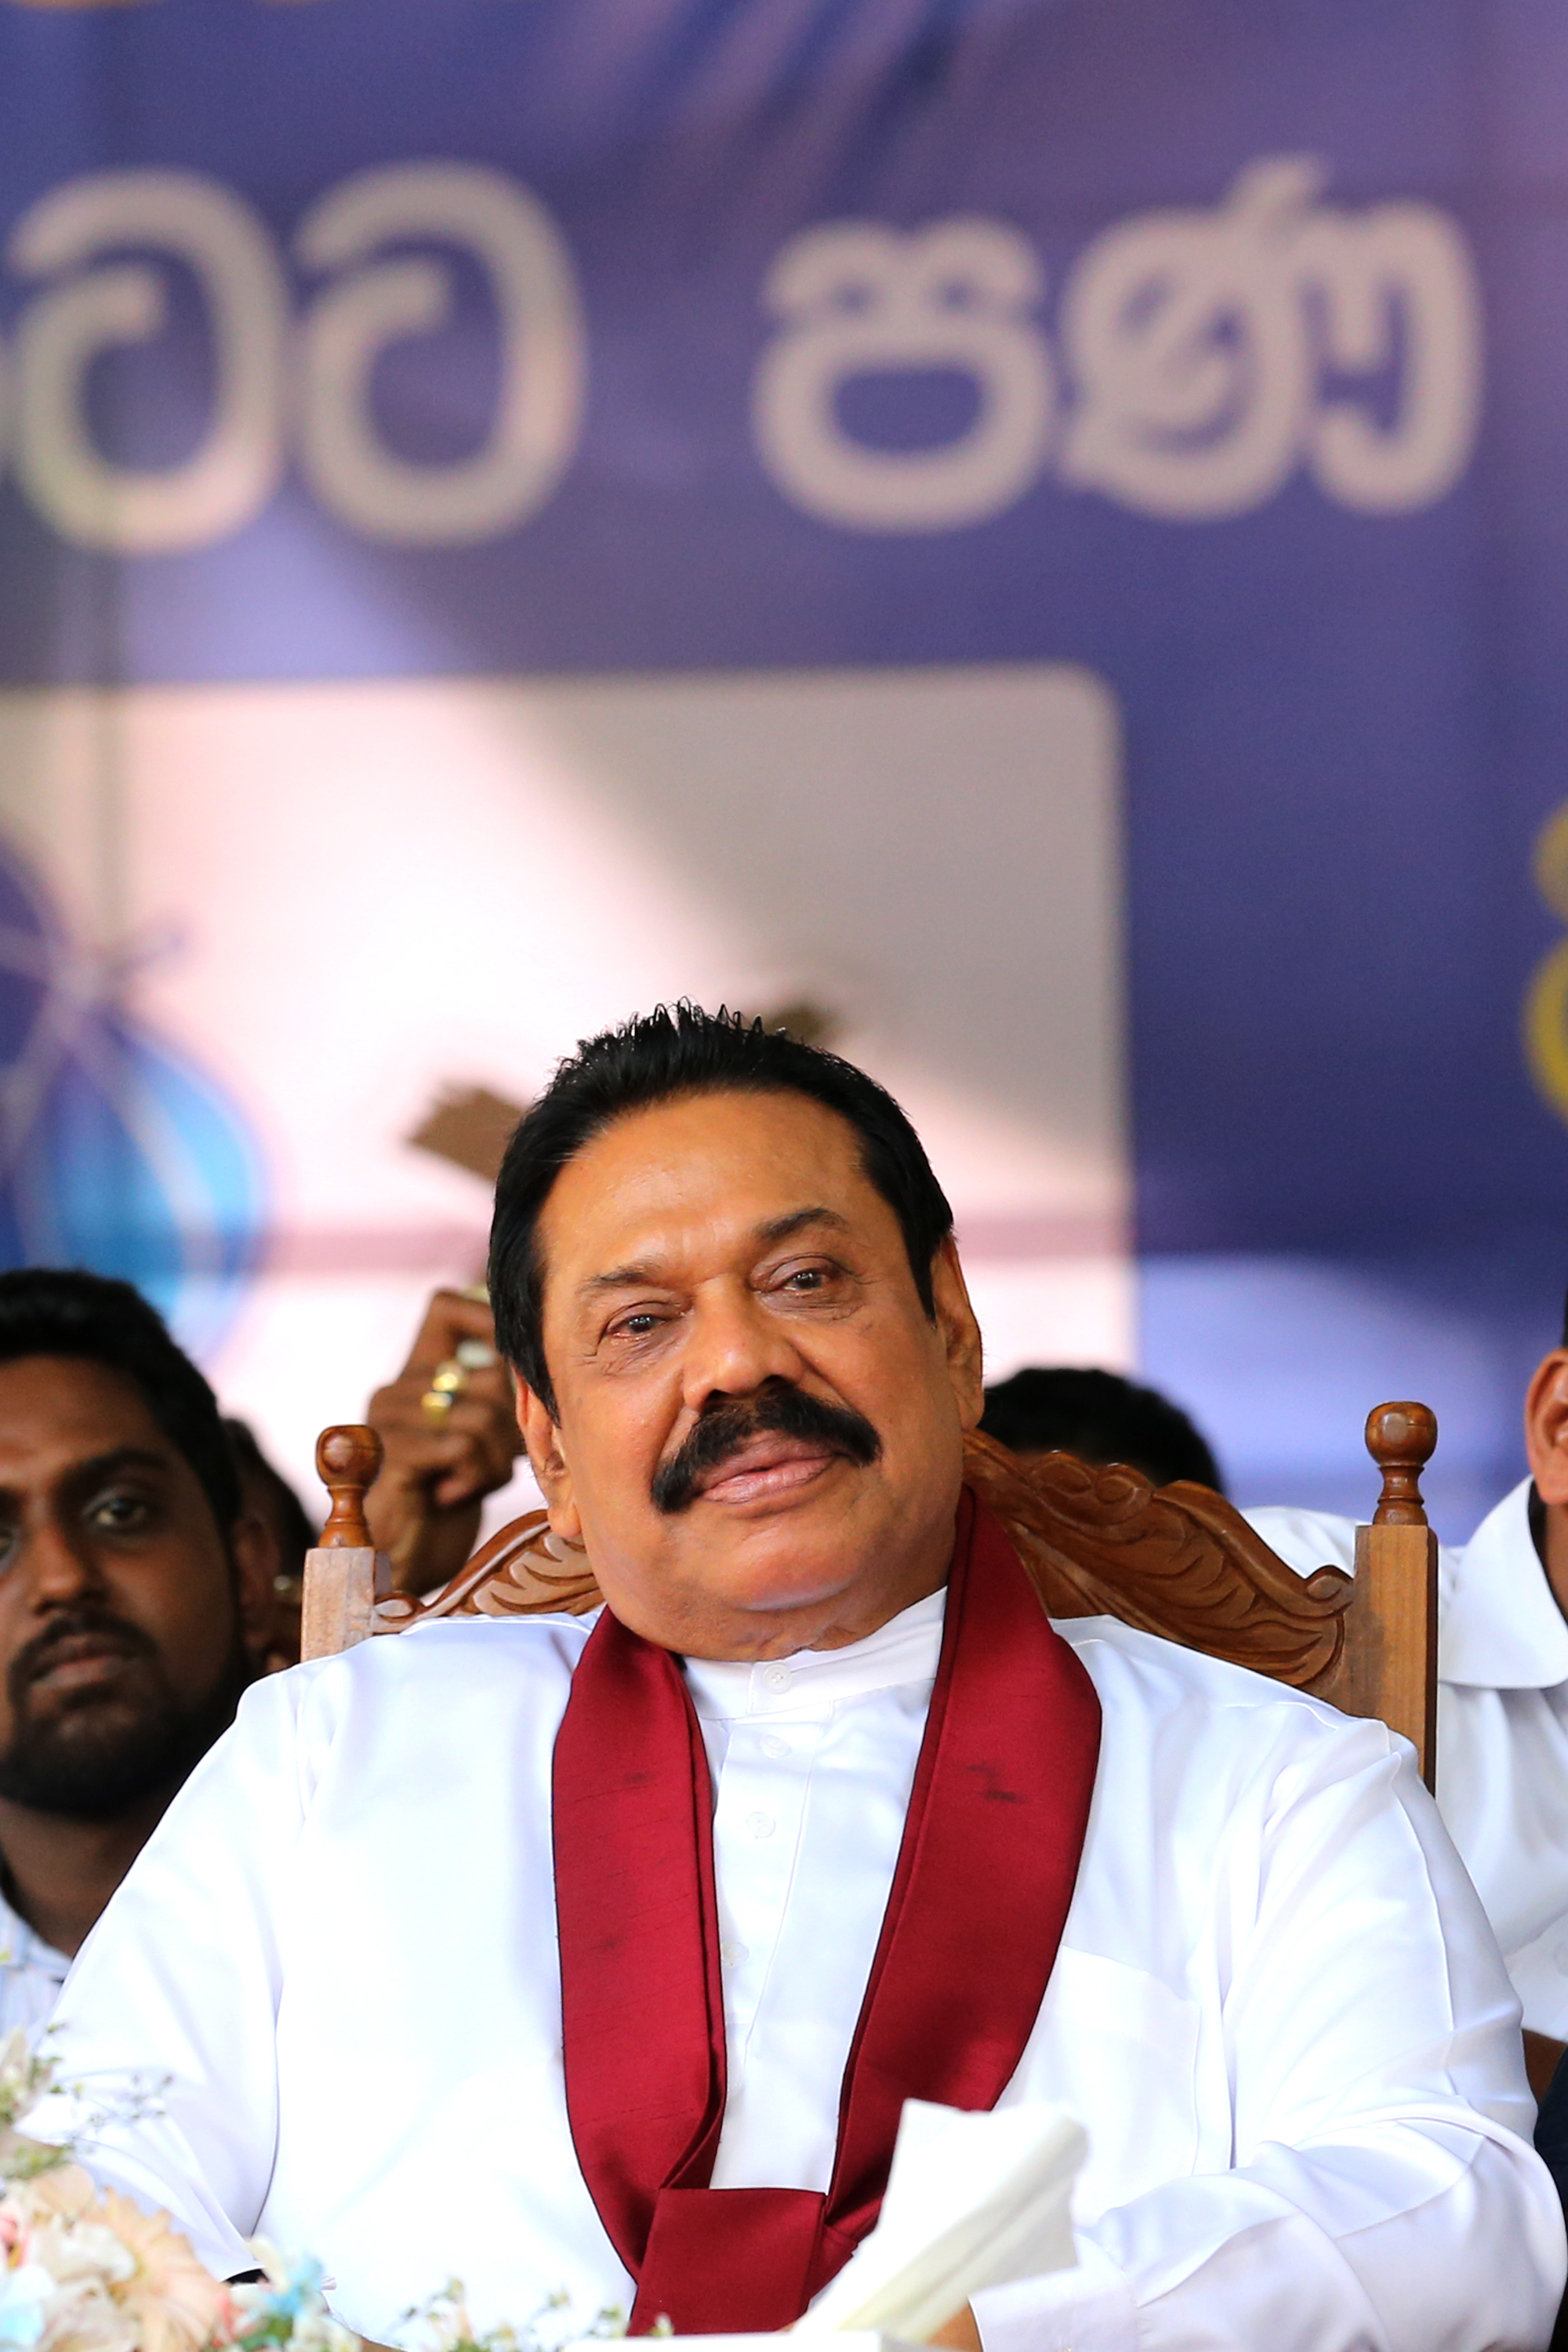 Former Sri Lankan president and parliamentary candidate Mahinda Rajapaksa attends his party's rally on the final day of the election campaign on August 14, 2015 in Kandy, Sri Lanka. (Buddhika Weerasinghe—Getty Images)